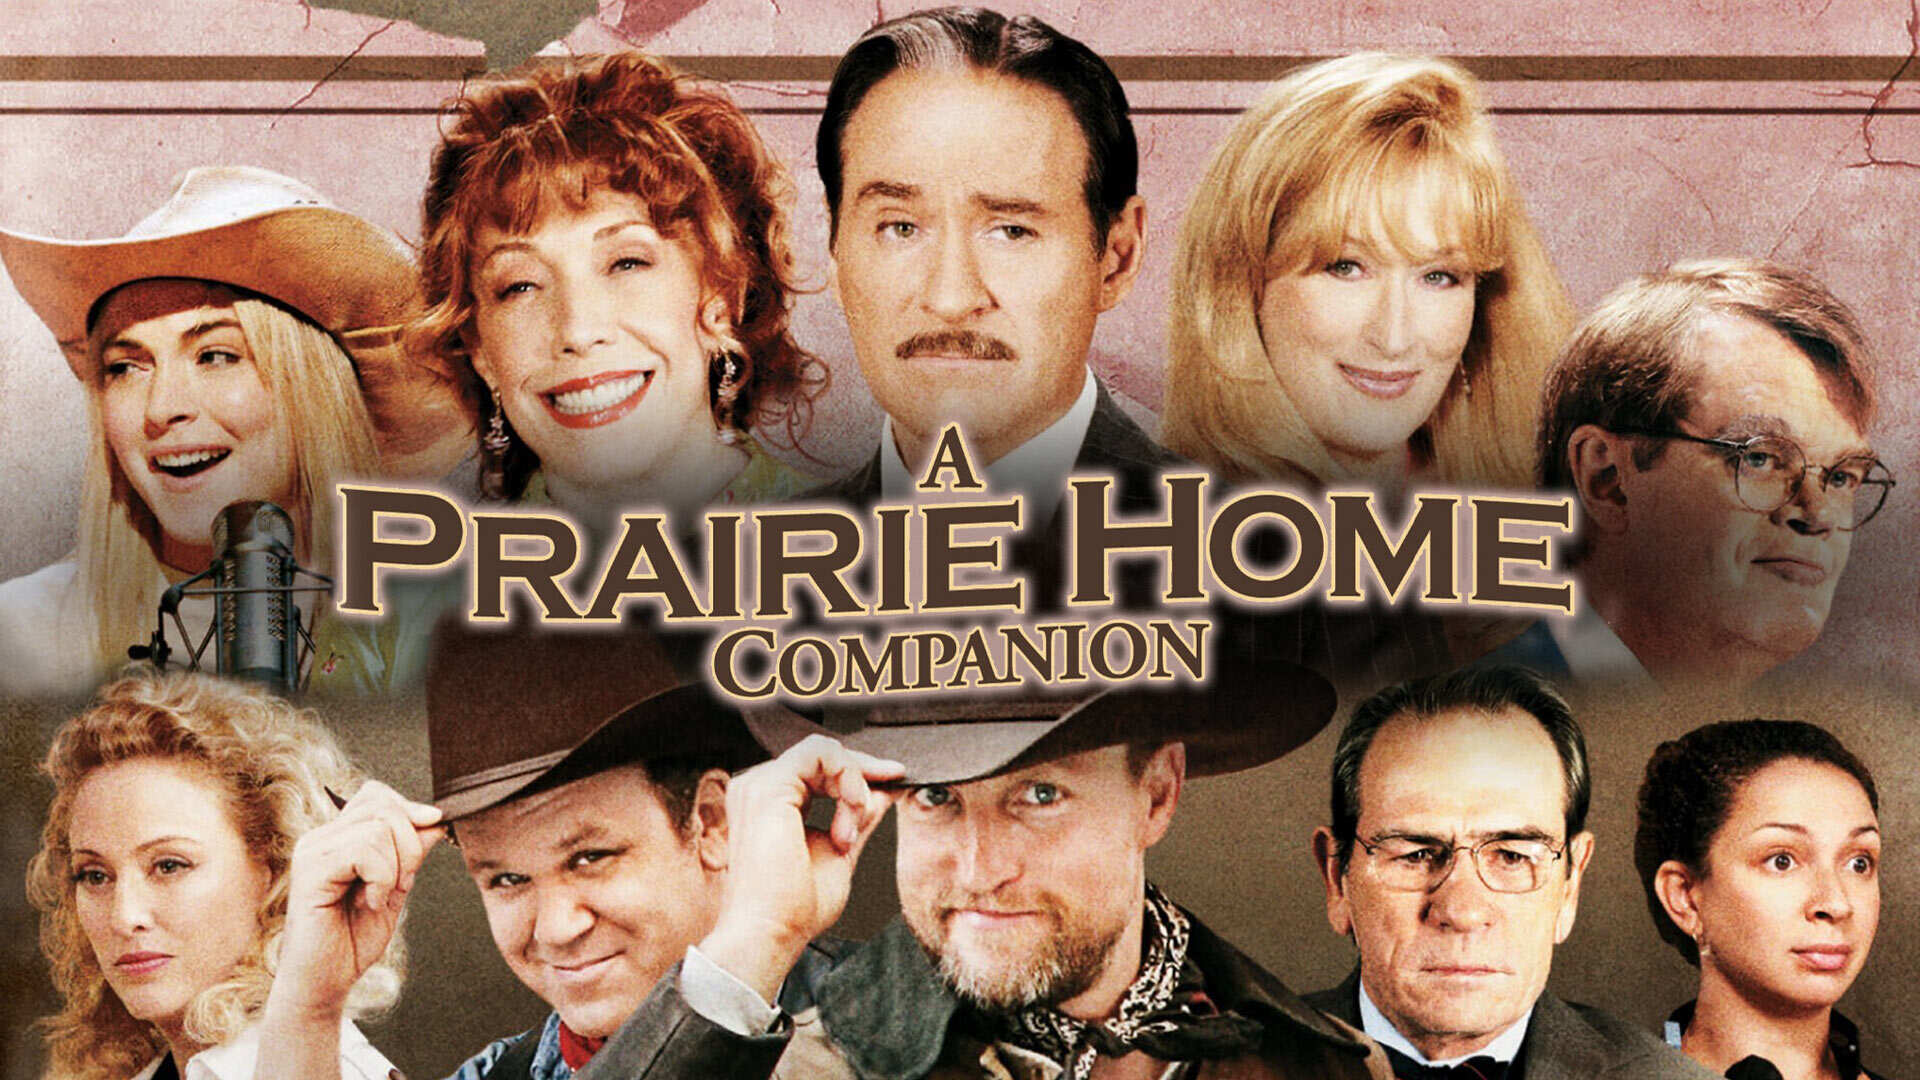 34-facts-about-the-movie-a-prairie-home-companion